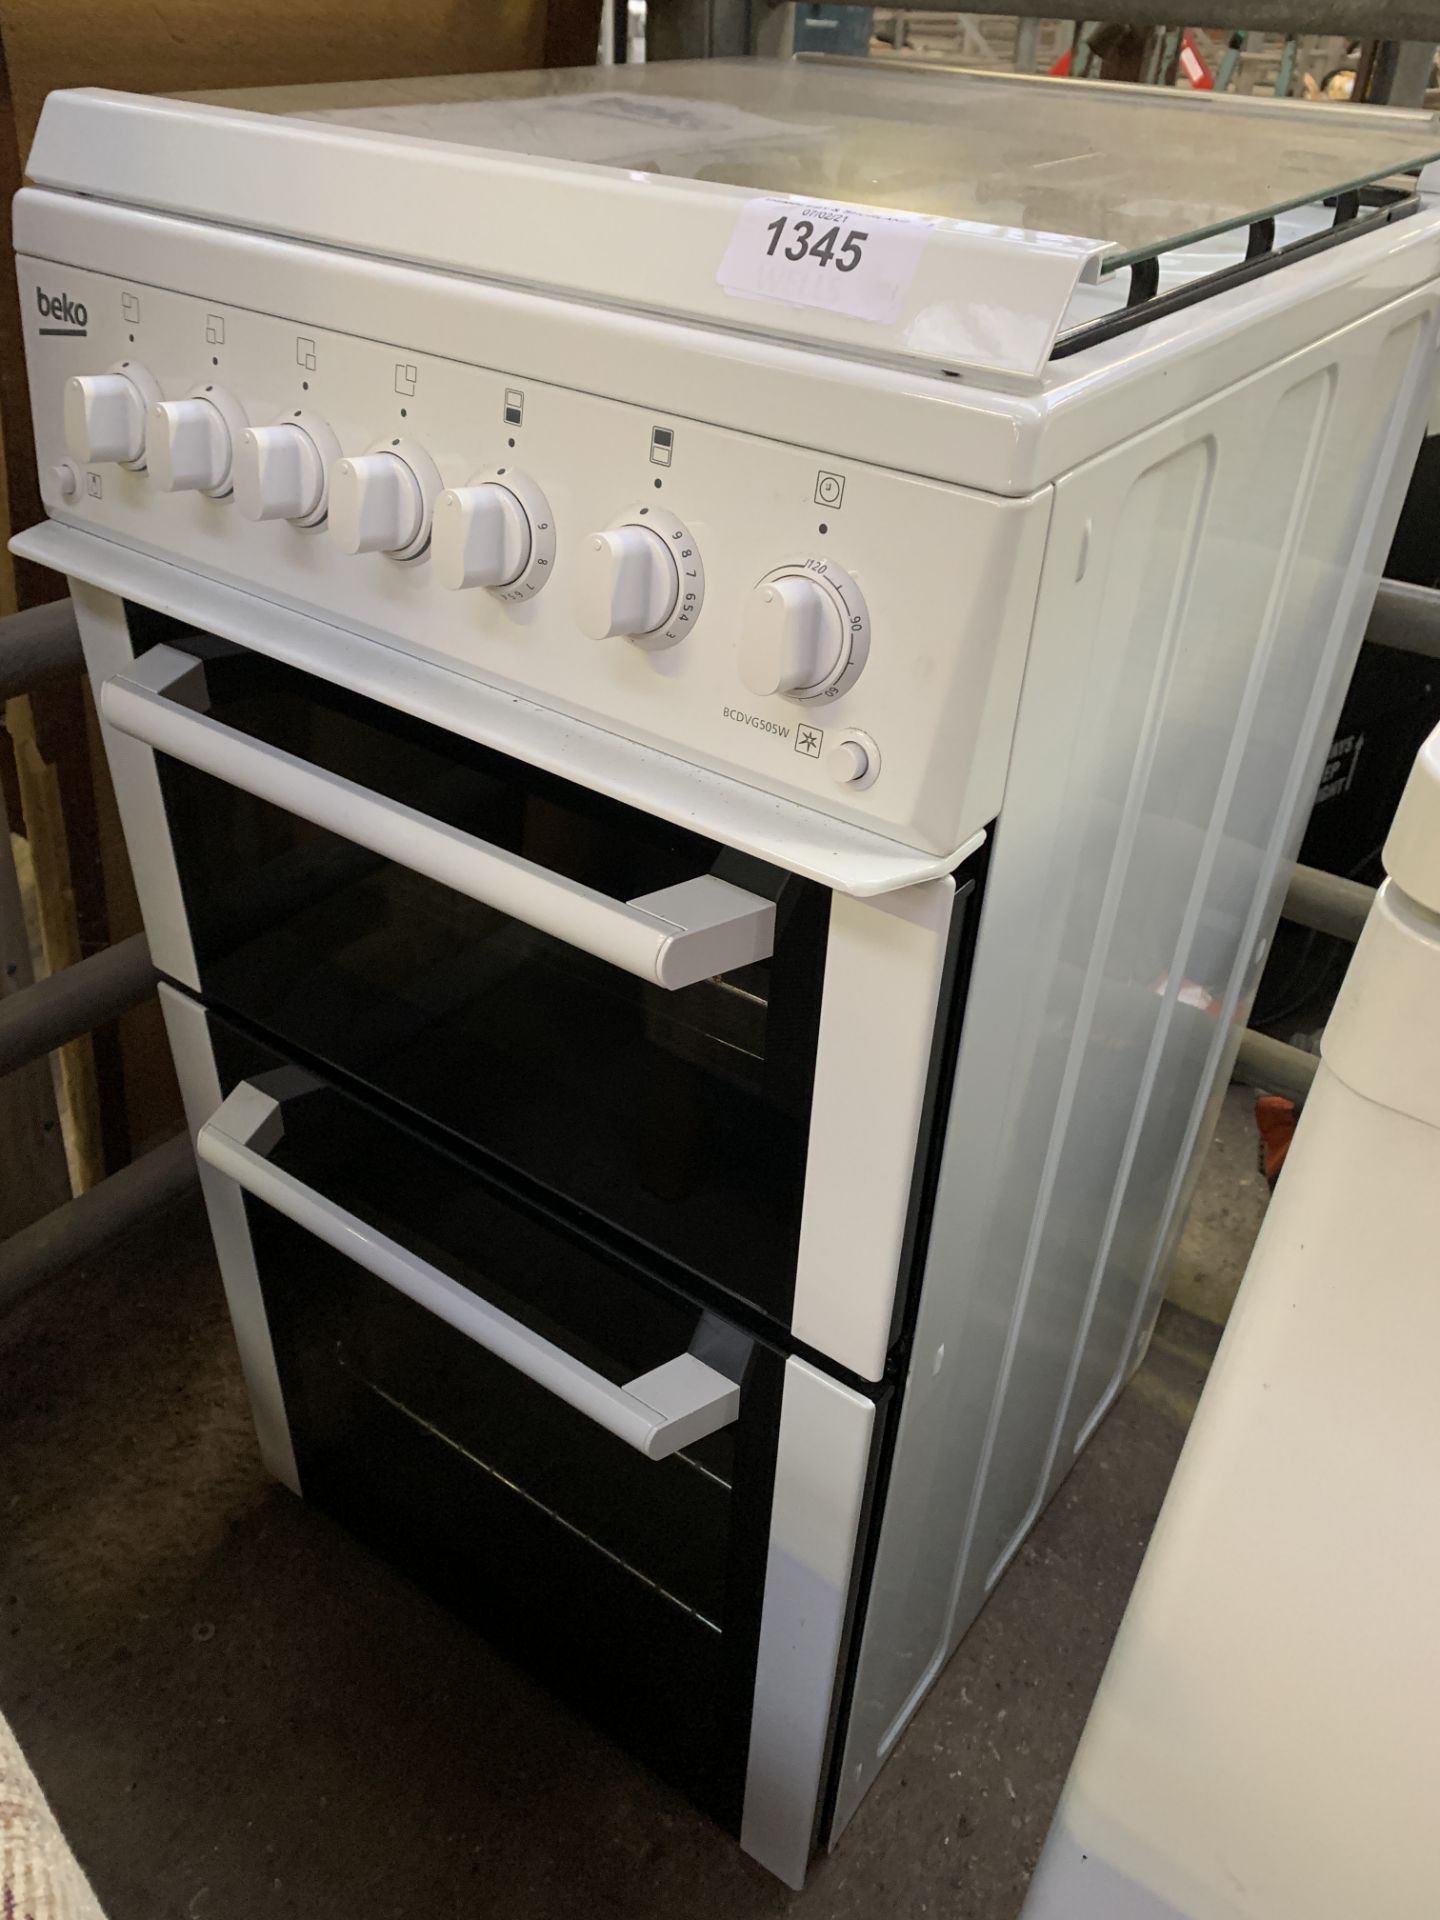 Beko BCDVG505W electric cooker with double oven